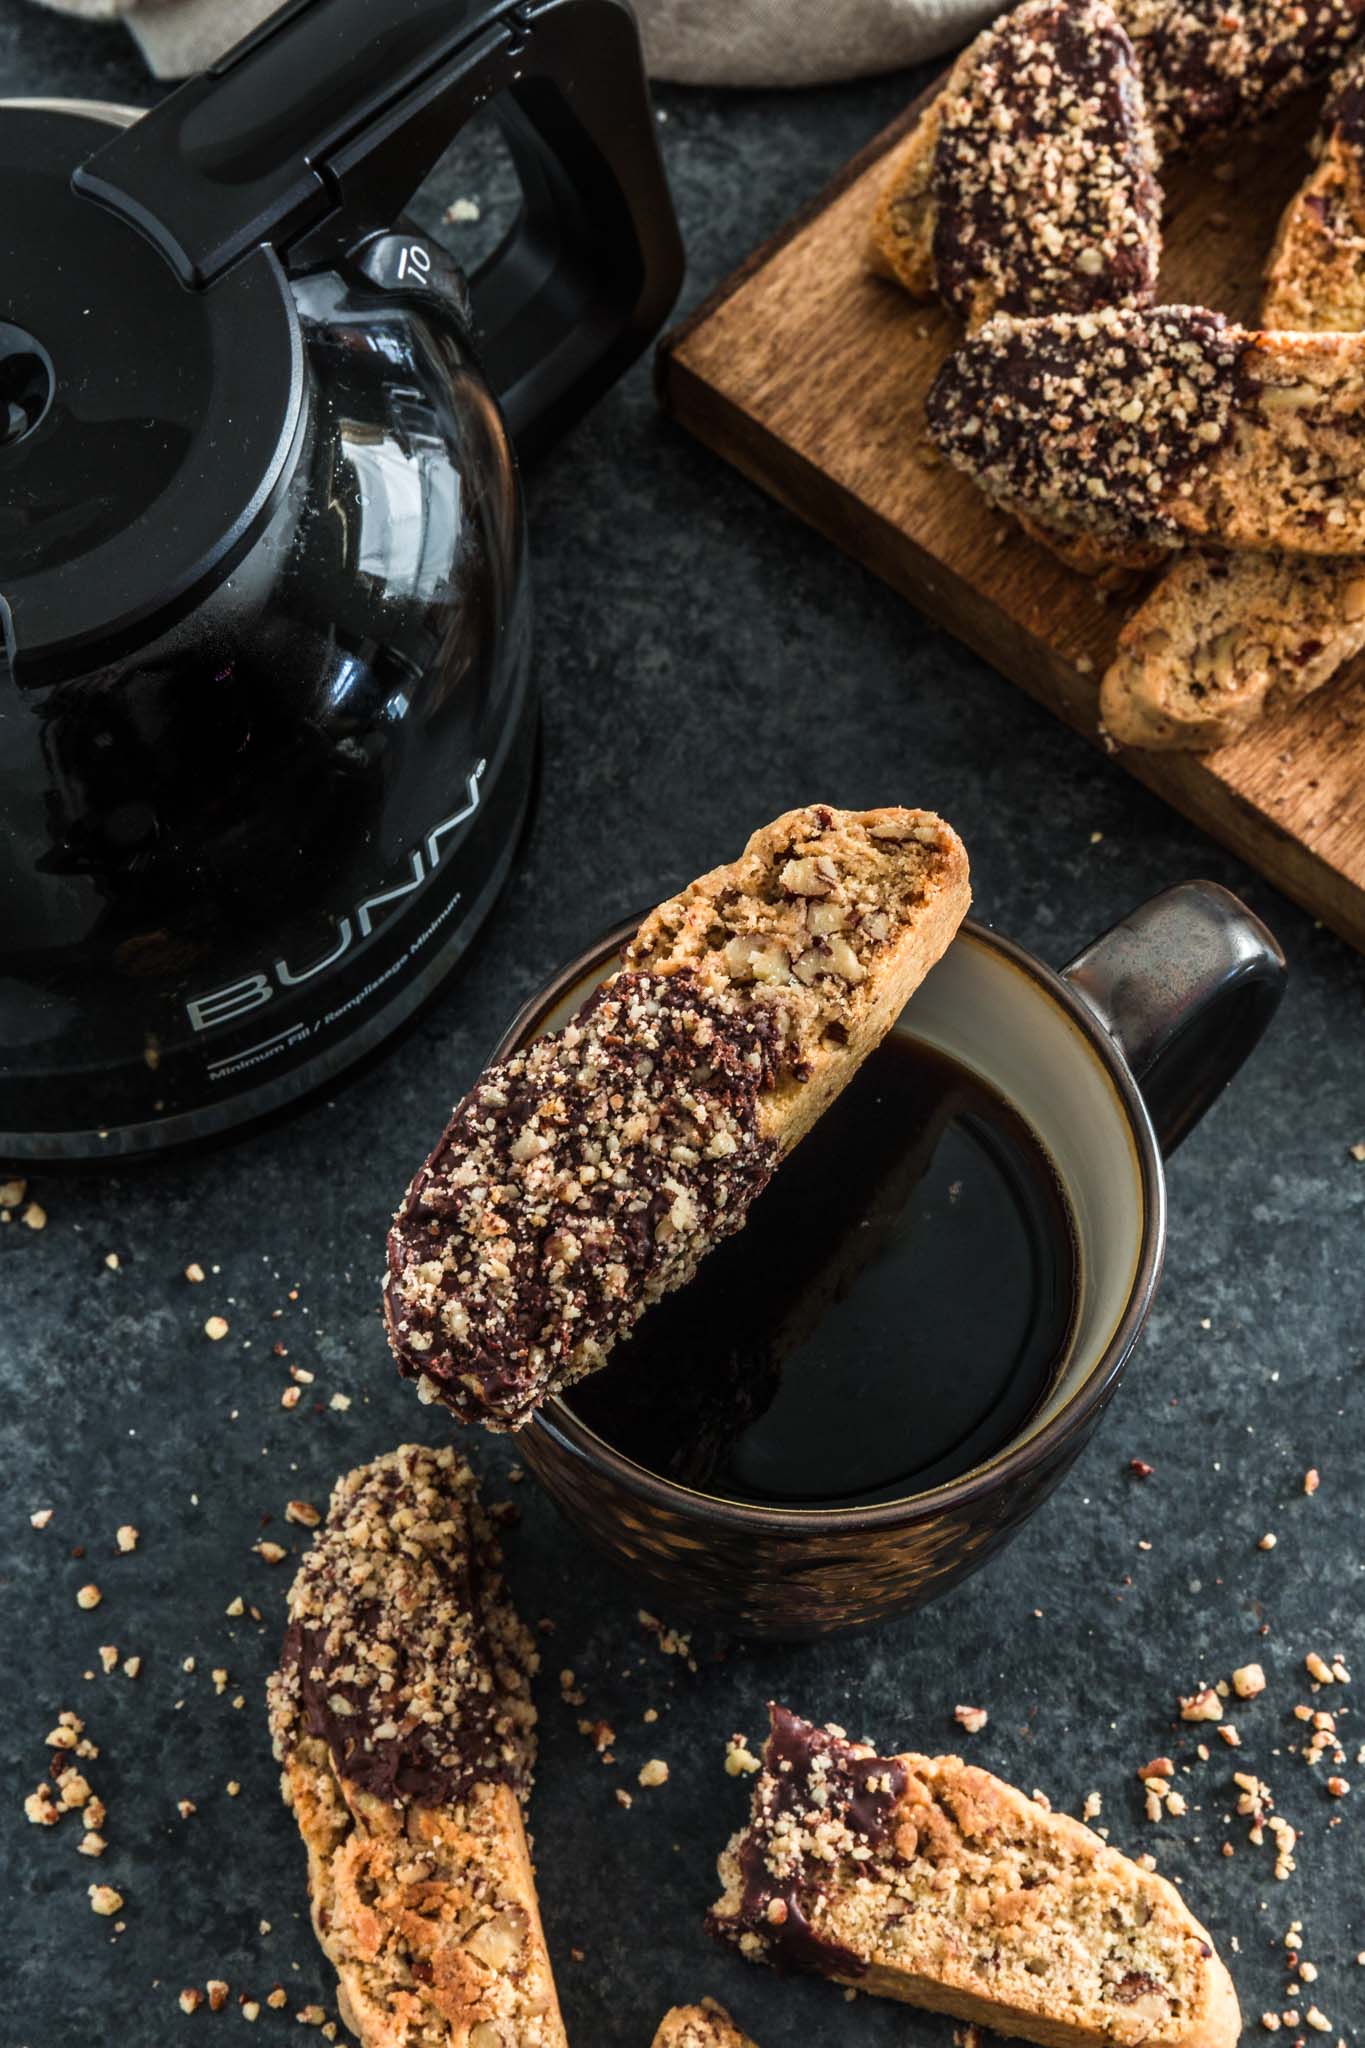 Chocolate Dipped Cinnamon Pecan Biscotti | www.oliviascuisine.com | Lighter than Italian biscotti, these Chocolate Dipped Cinnamon Pecan Biscotti are crisp, tender and filled with some of my favorite holiday noms: cinnamon, pecan and chocolate! Perfect to give out as holiday gifts or just to dunk into your coffee. 